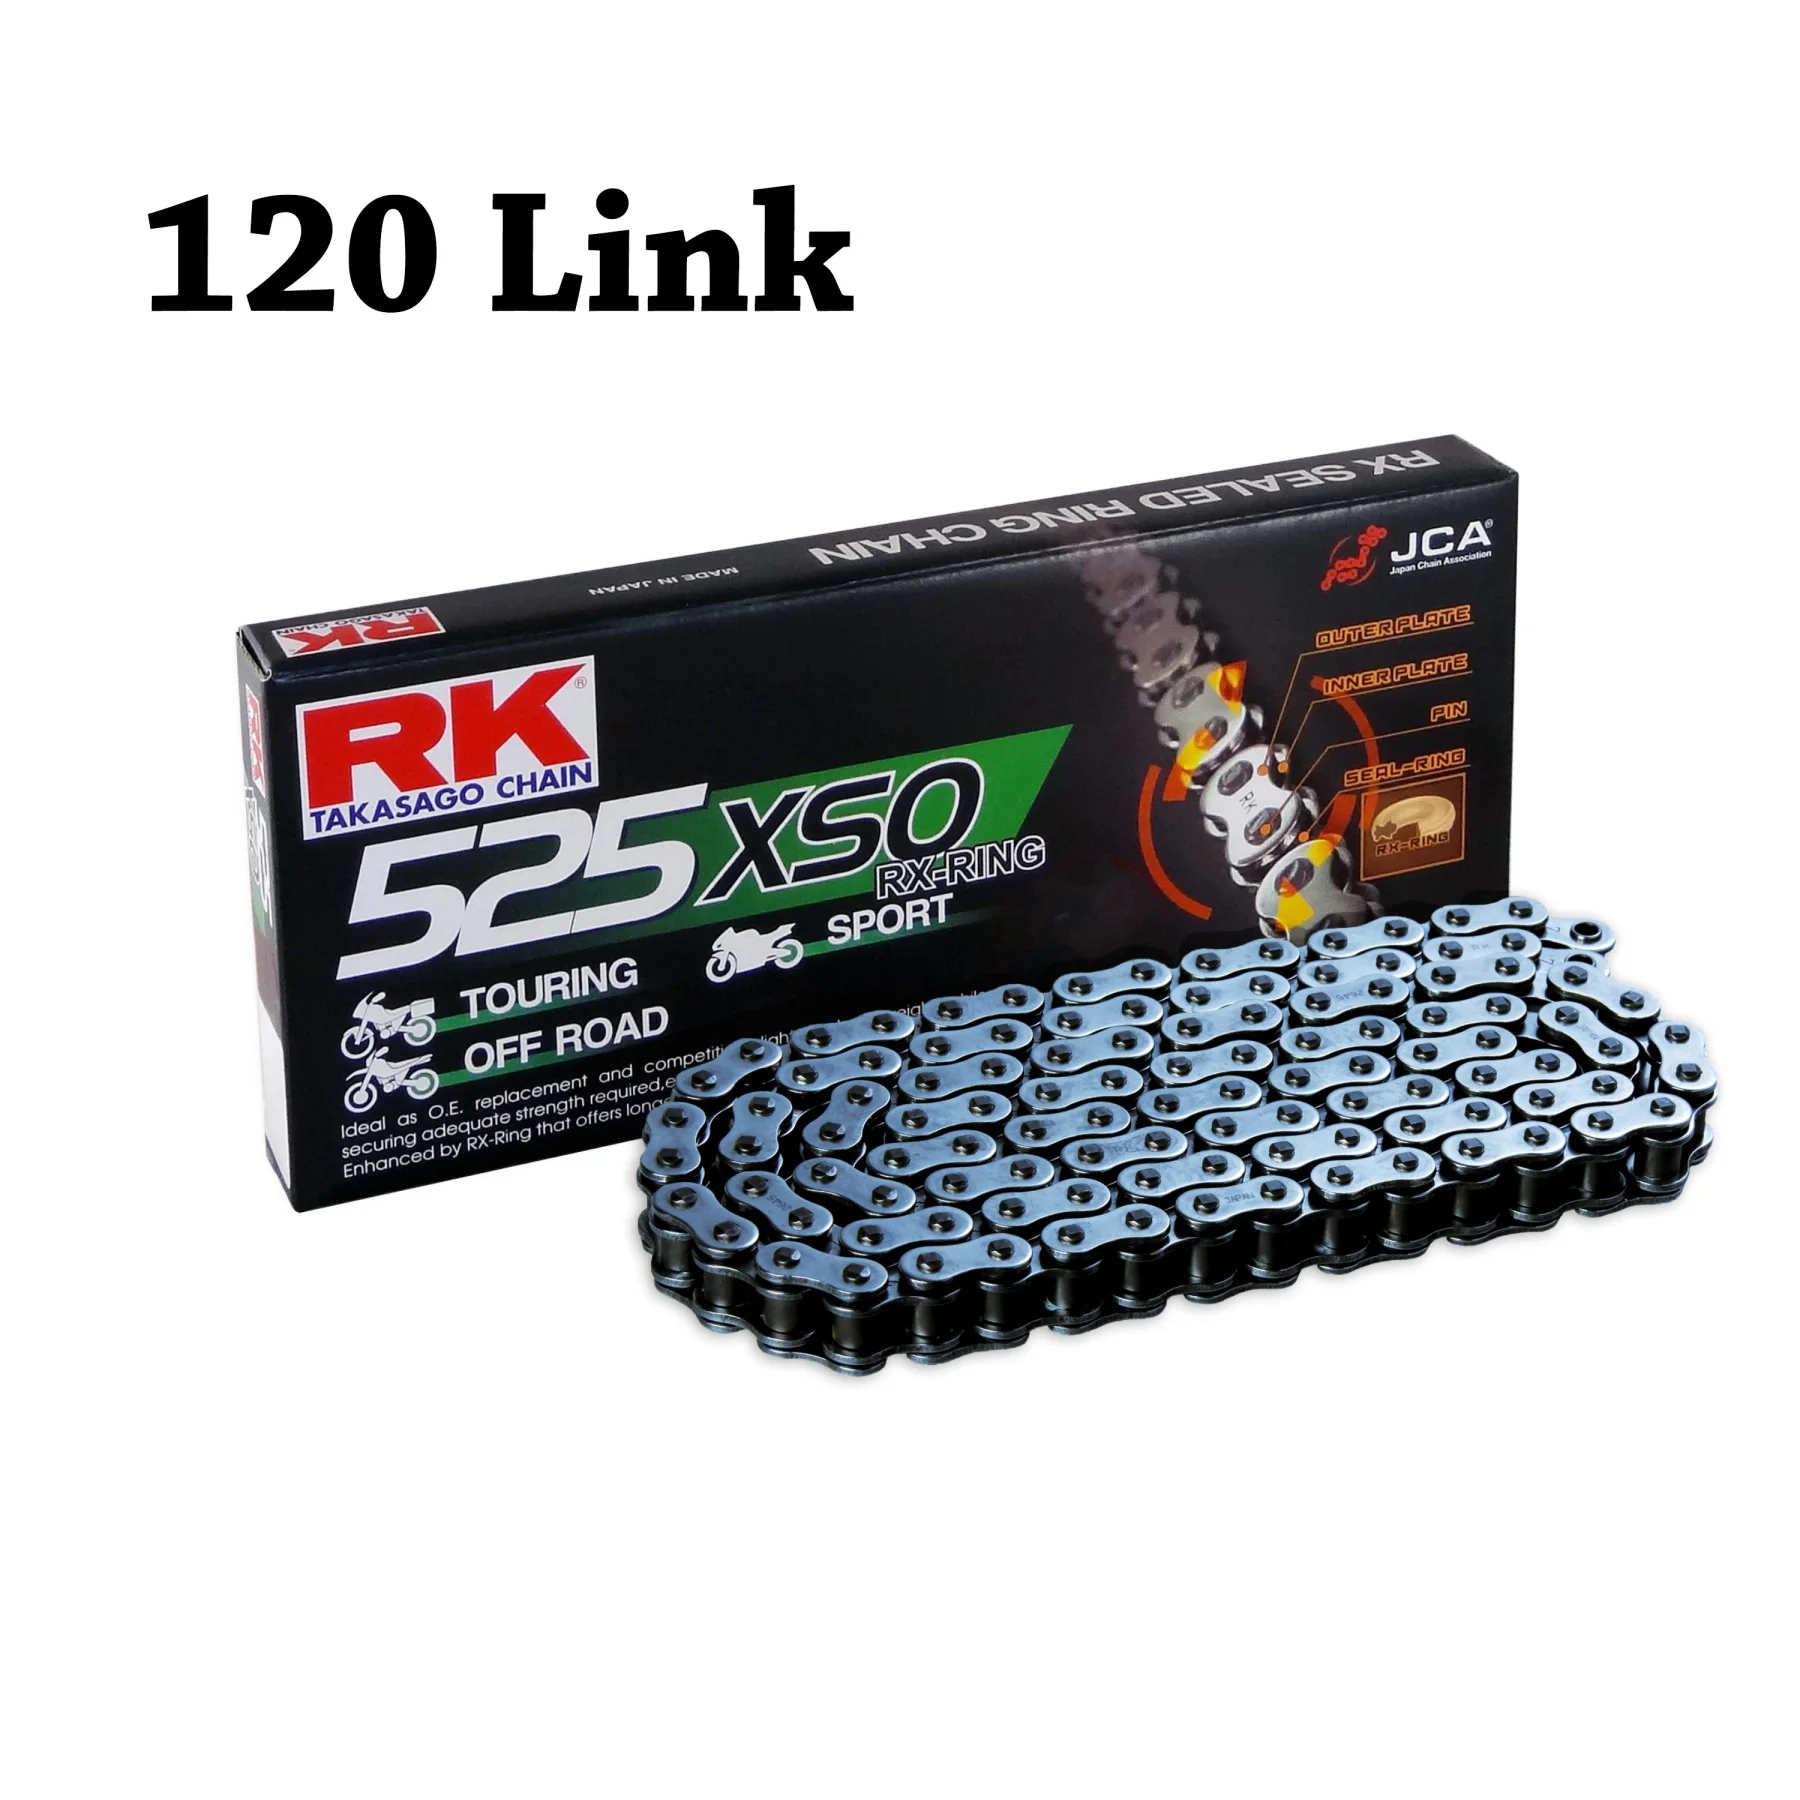 

RK Motorcycle Chain X-Ring 525 XSO 120L for Ducati 600-696-750-900-1200 Monster/Supersport/GT/ST/Multistrada/Streetfighter/Senna